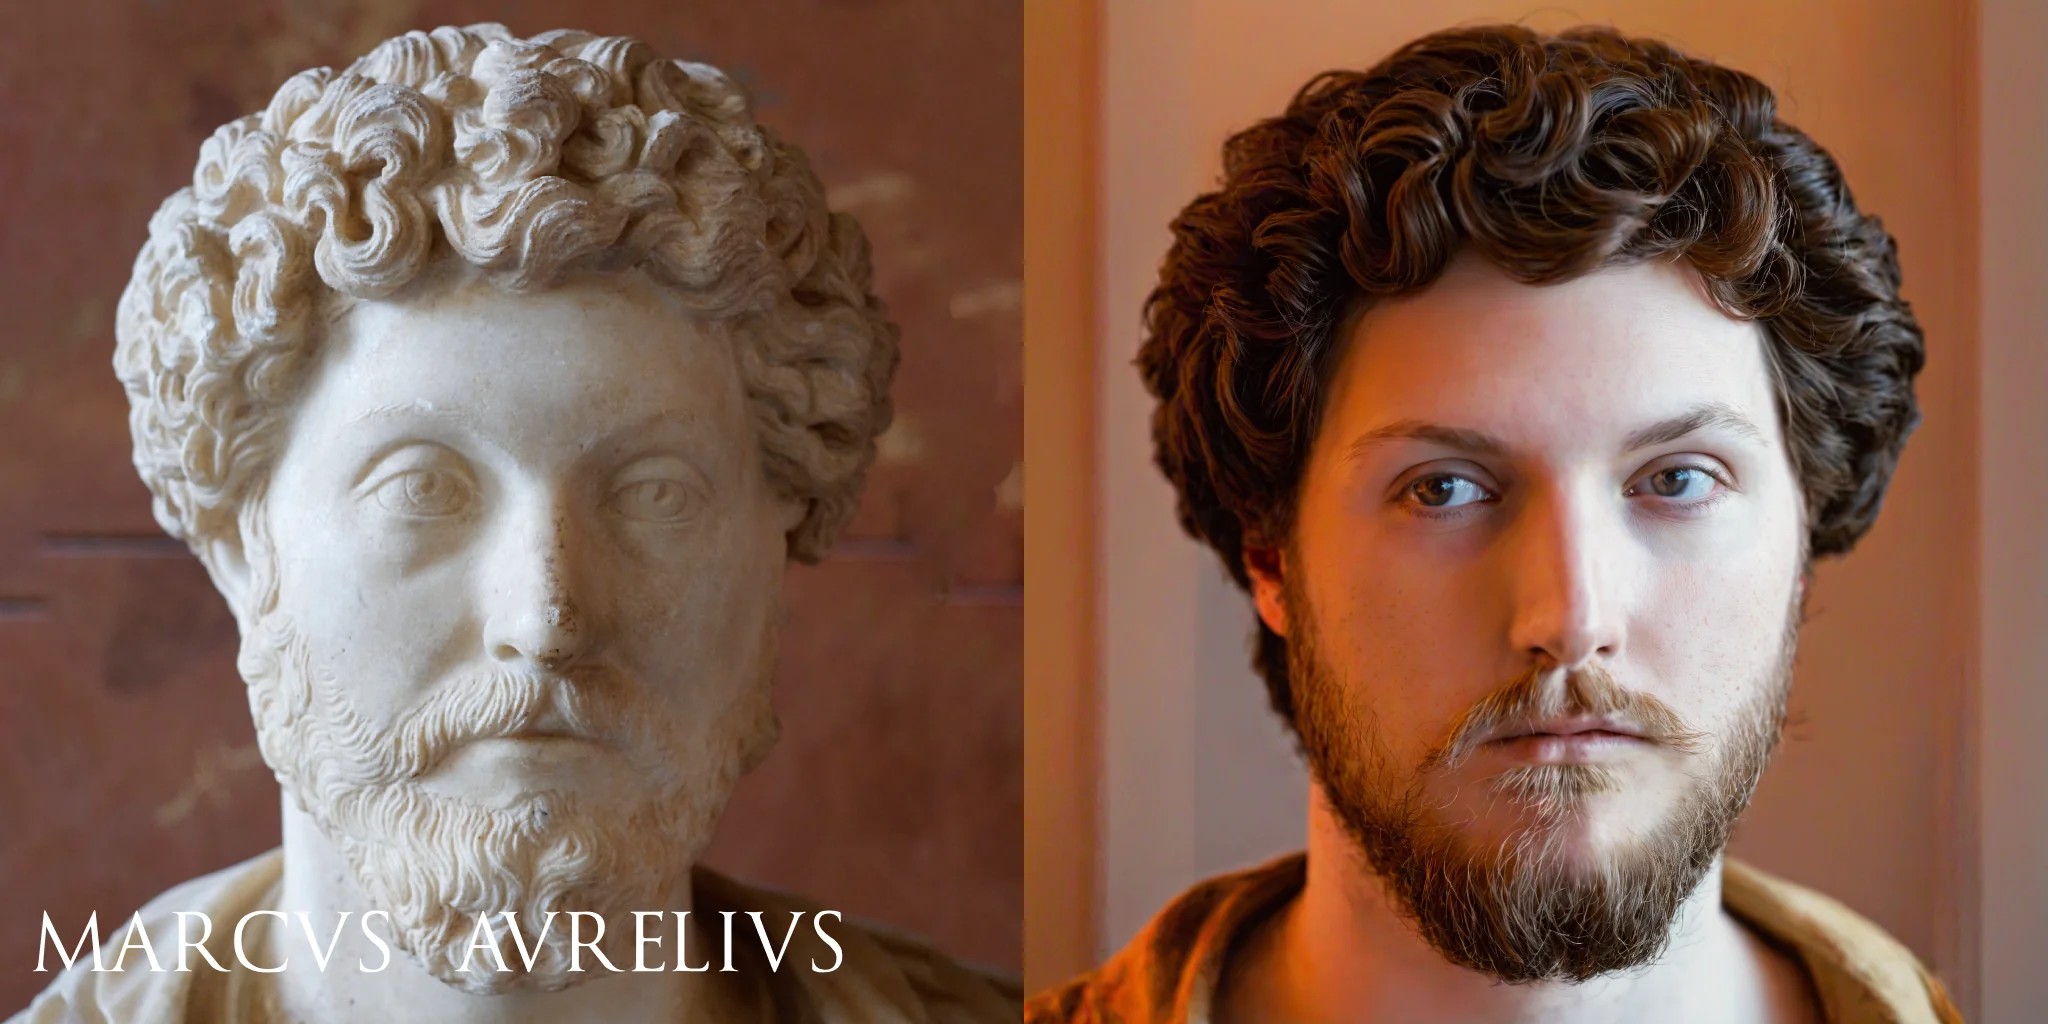 Roman busts brought to life